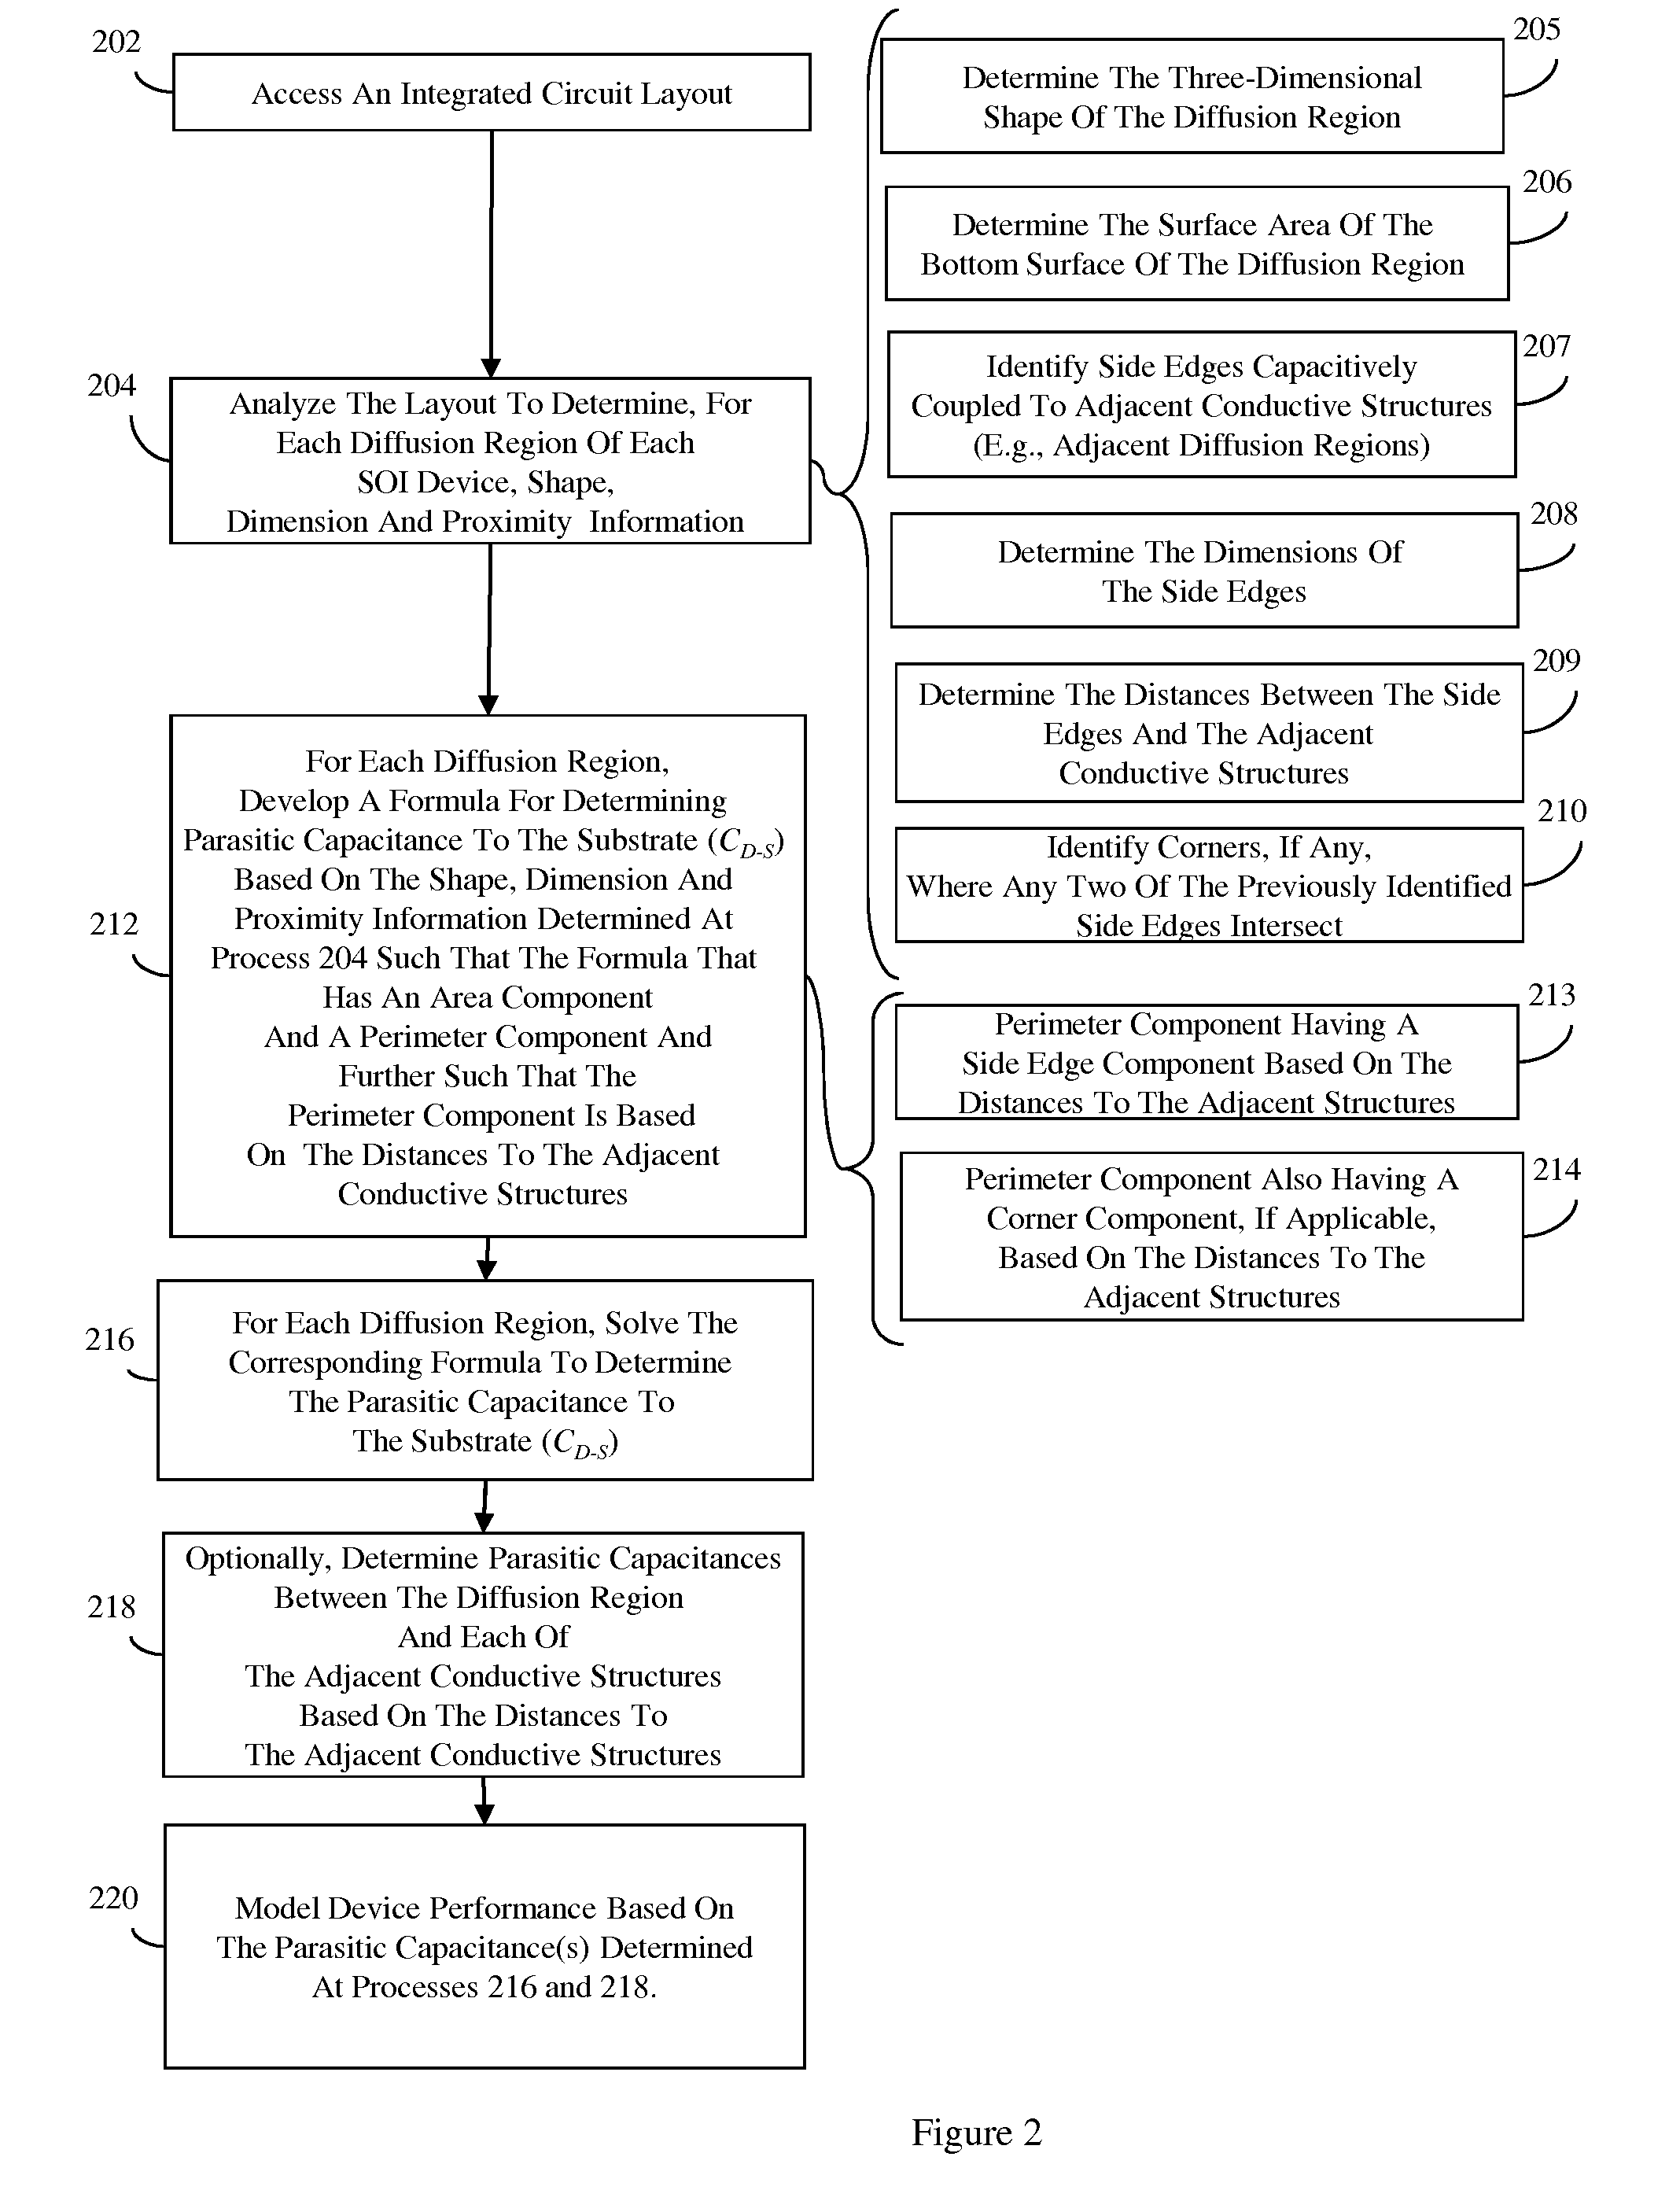 Method, system and program storage device for modeling the capacitance associated with a diffusion region of a silicon-on-insulator device